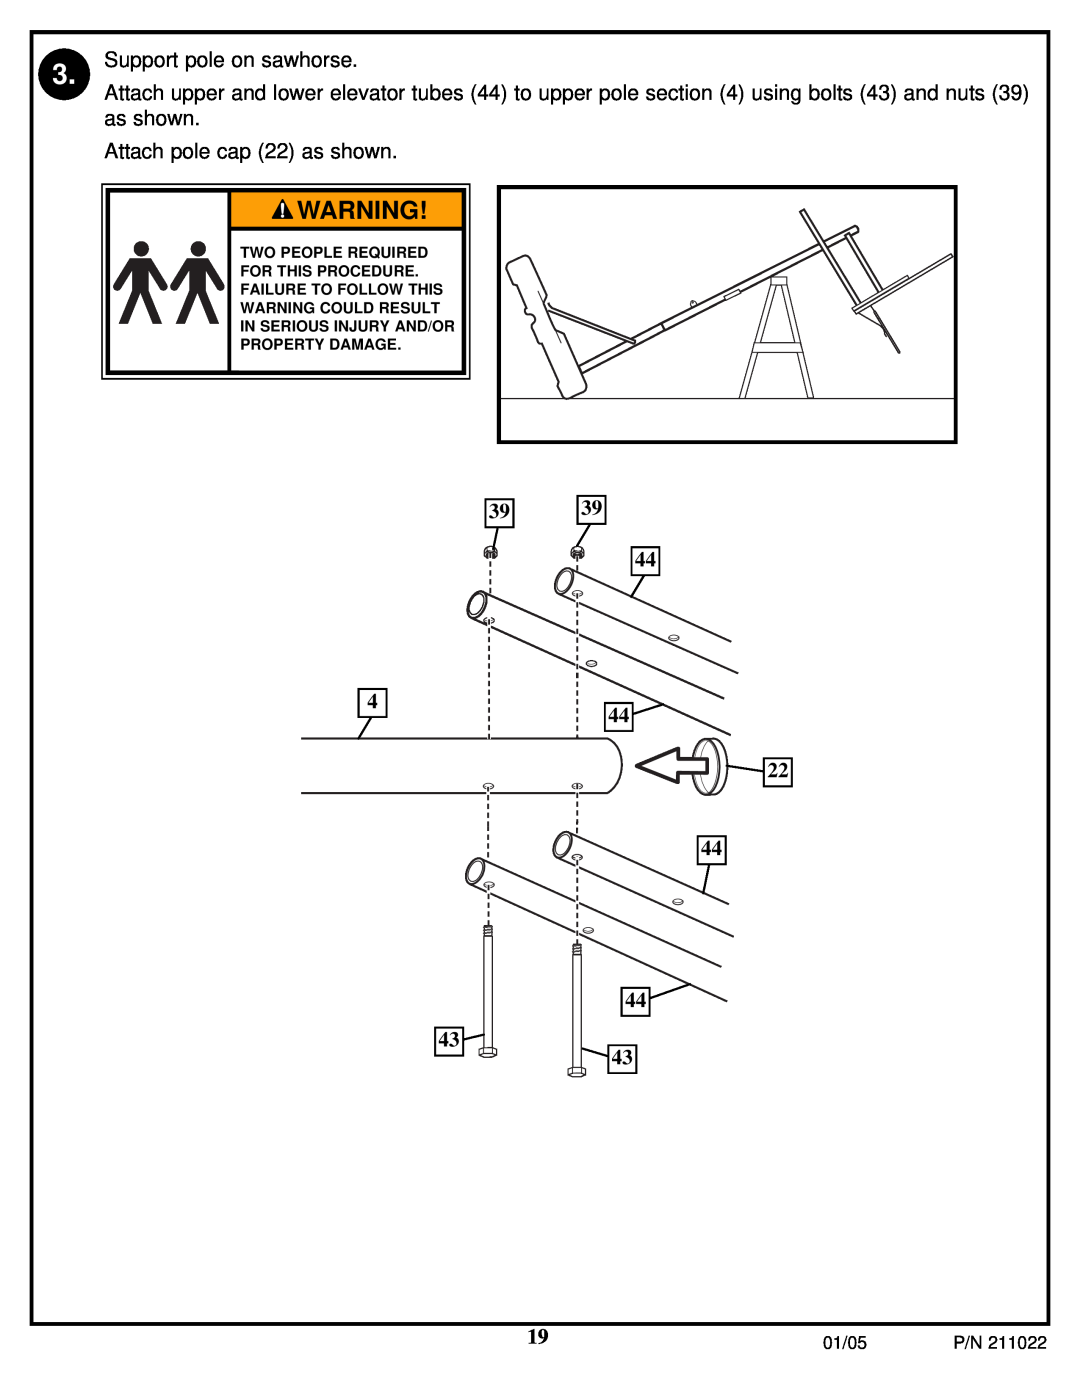 Huffy Portable System manual Support pole on sawhorse, Attach pole cap 22 as shown 